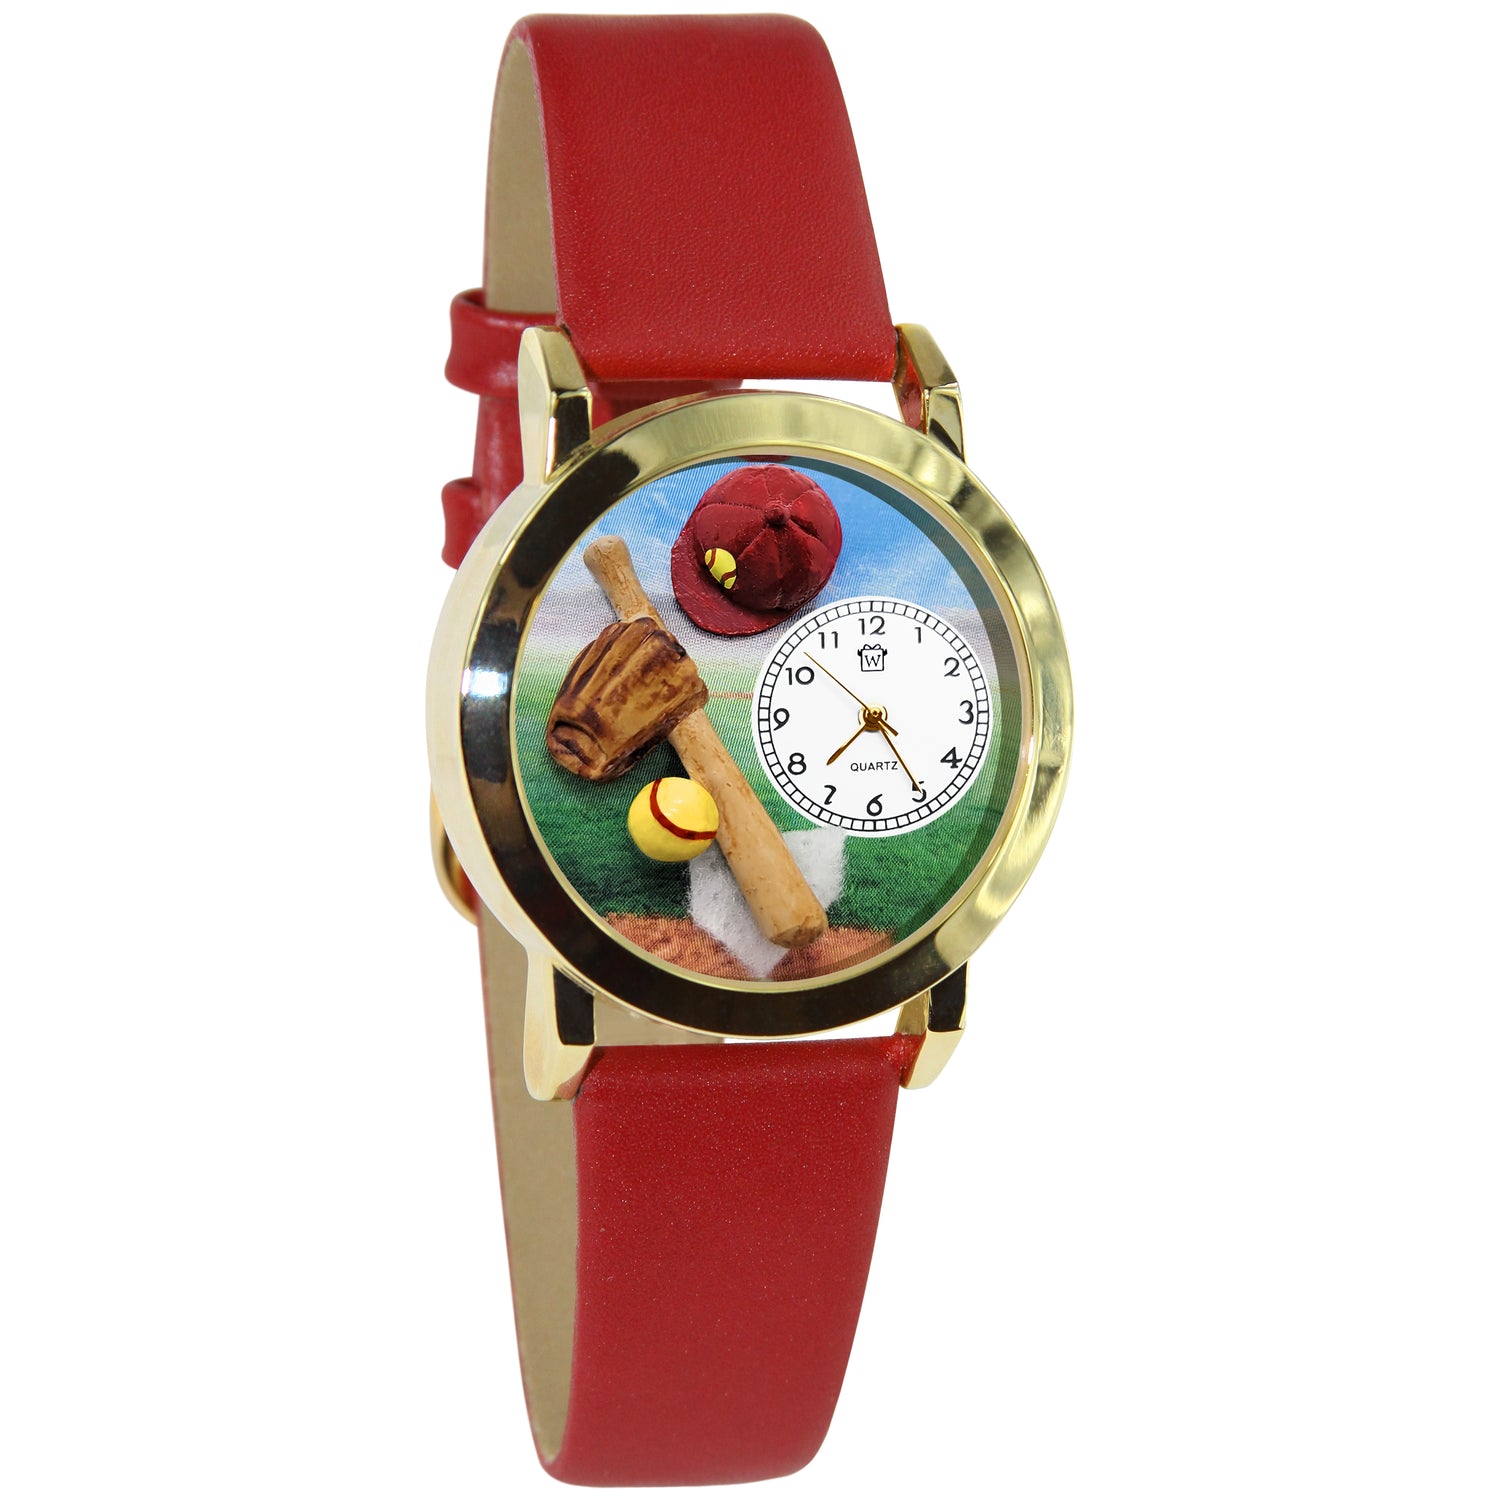 Whimsical Gifts | Softball 3D Watch Small Style | Handmade in USA | Hobbies & Special Interests | Sports | Novelty Unique Fun Miniatures Gift | Gold Finish Red Leather Watch Band